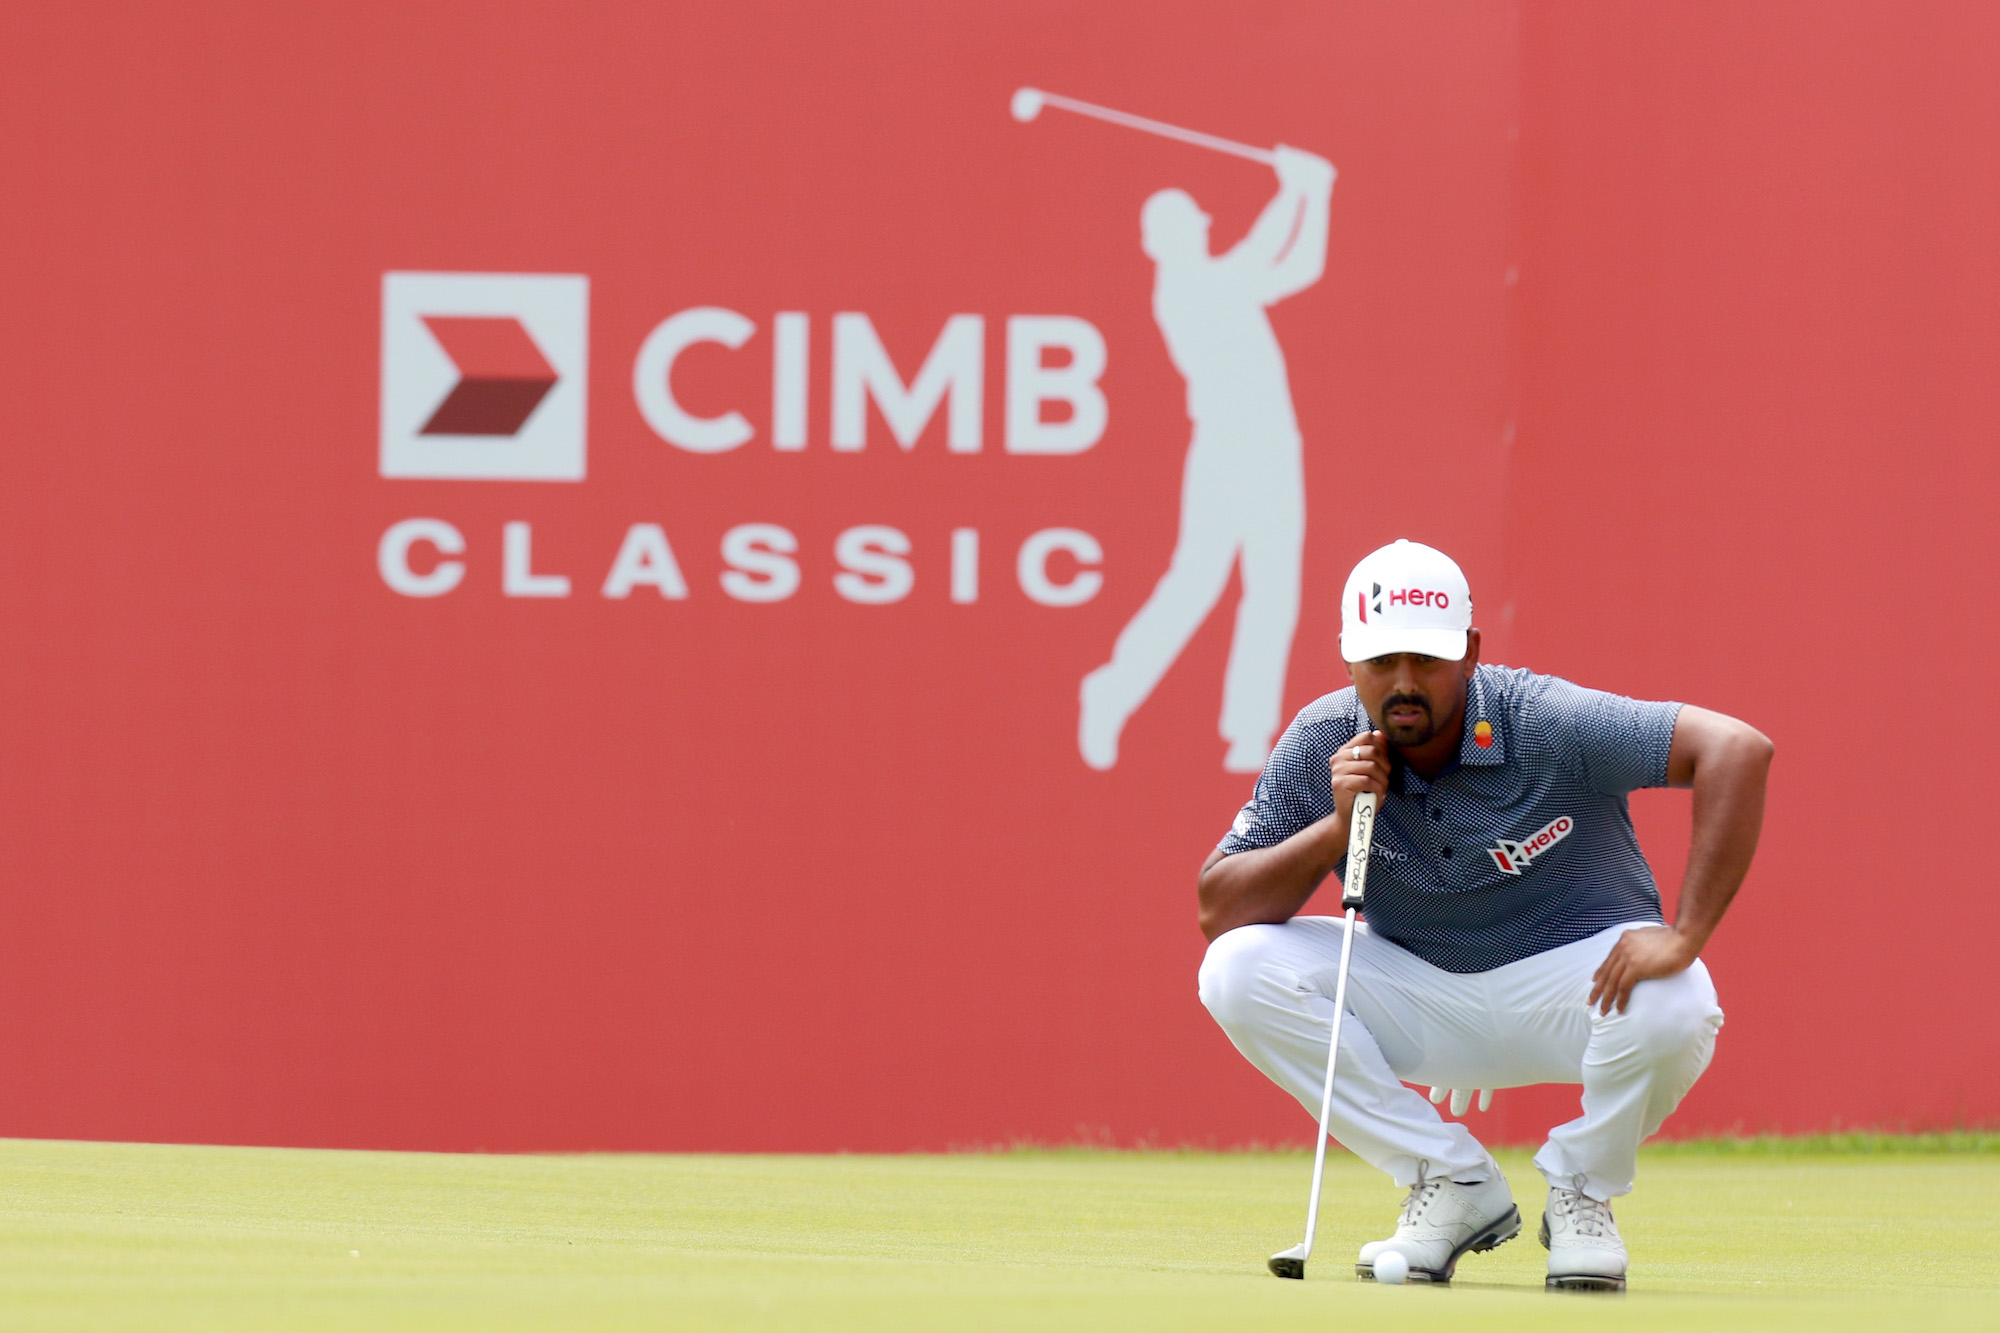 Stellar line-up of global golf stars primed for CIMB Classic in October